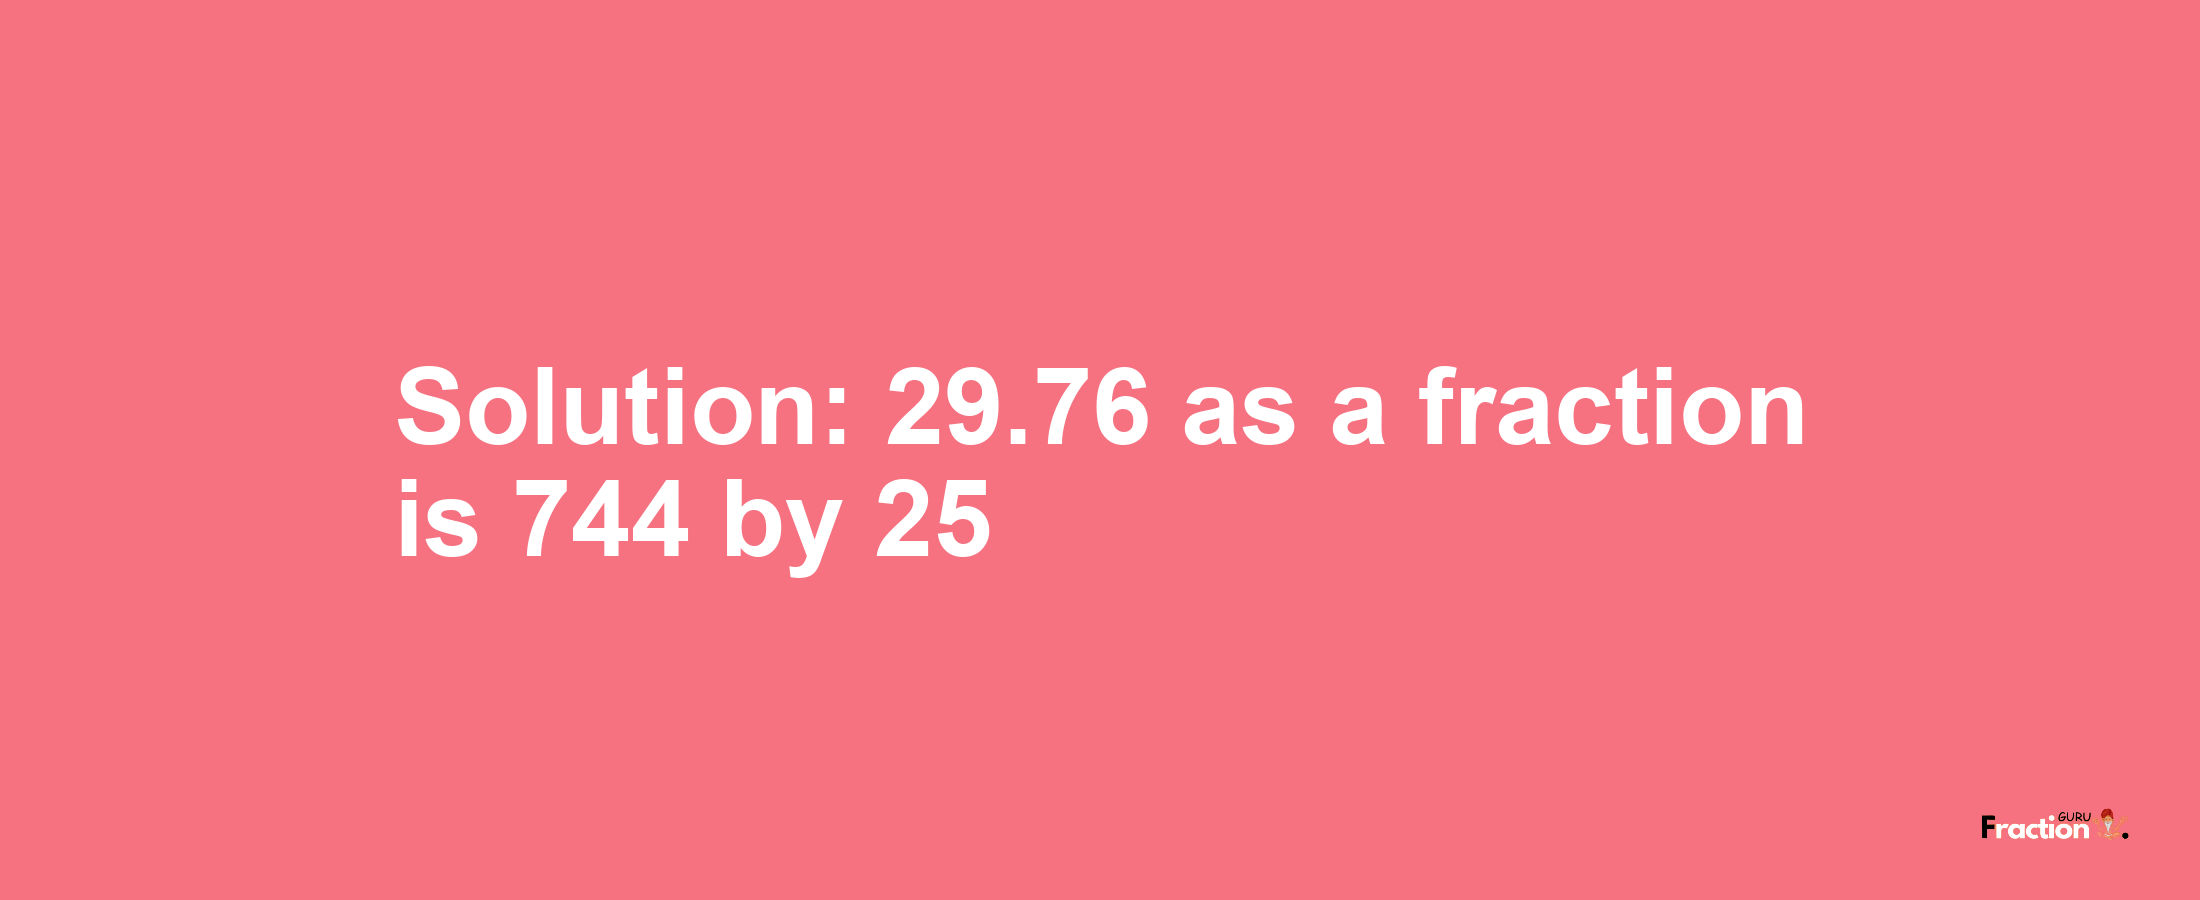 Solution:29.76 as a fraction is 744/25